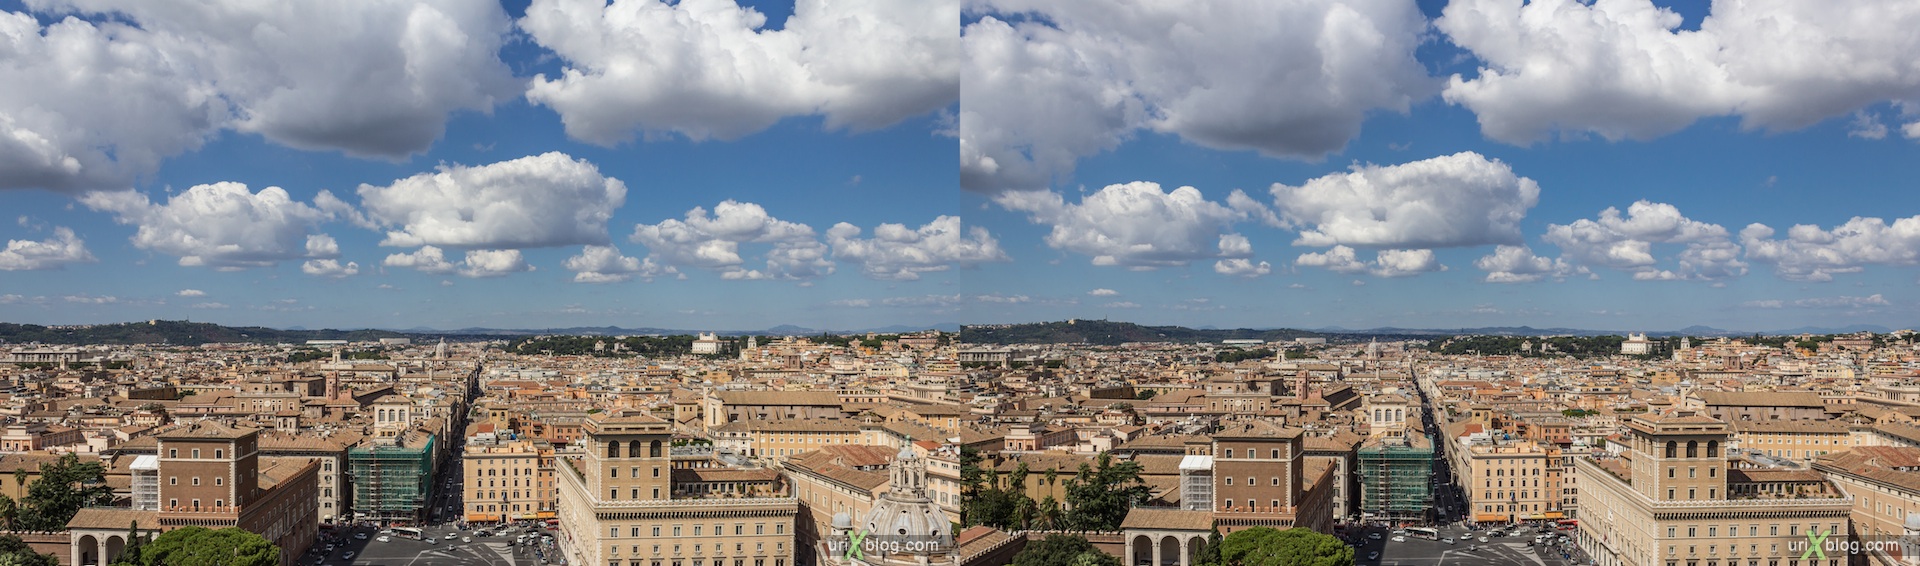 2012, Vittoriano, Monument of Vittorio Emanuele II, roof, panorama, viewpoint, city view, Rome, Italy, Europe, 3D, stereo pair, cross-eyed, crossview, cross view stereo pair